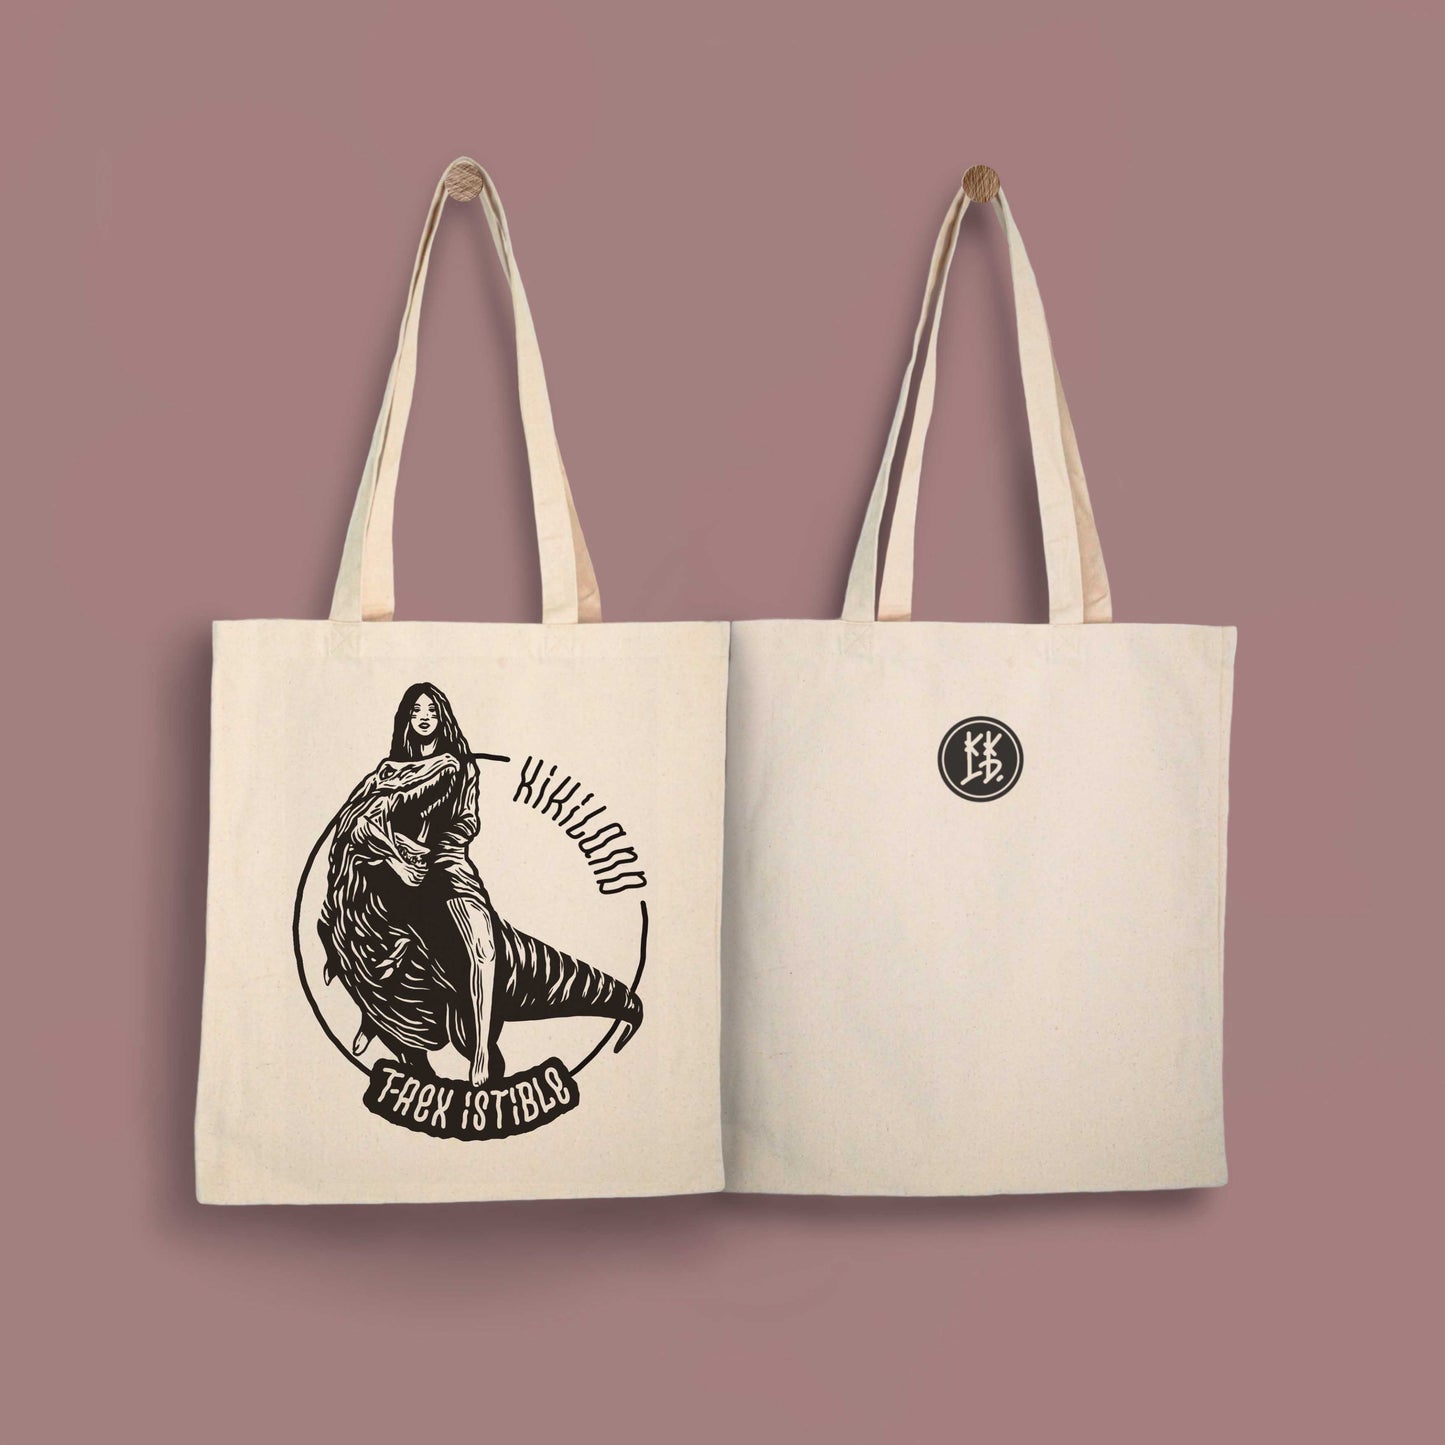 Tote bag "T-rex istible"